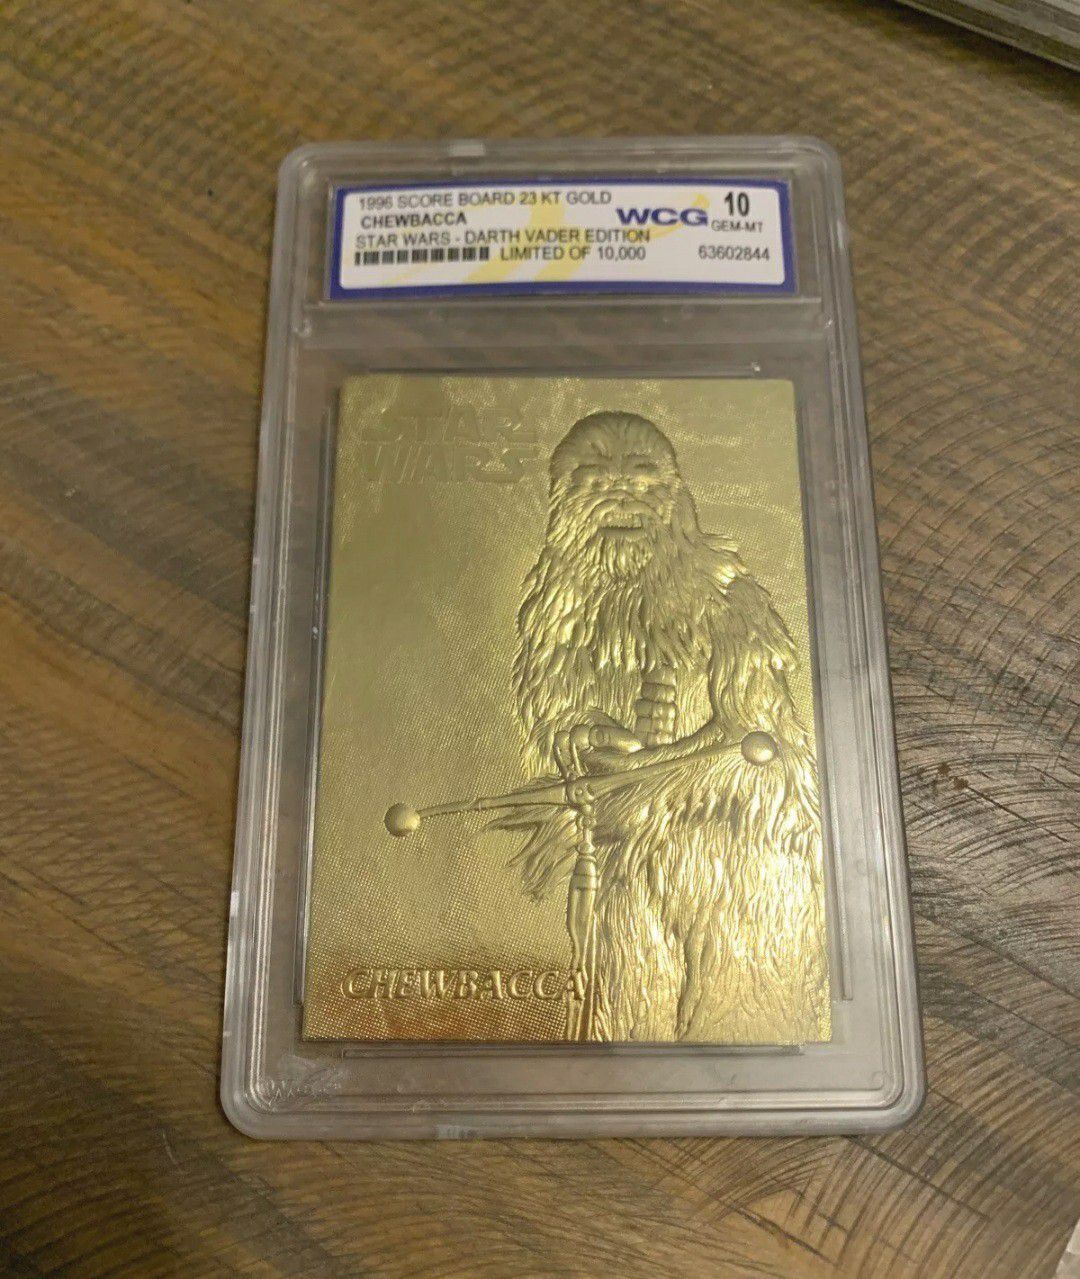 1996 Star Wars Darth Vader Edition Chewbacca Limited Edition Card 23kt Gold. WCG 10 graded